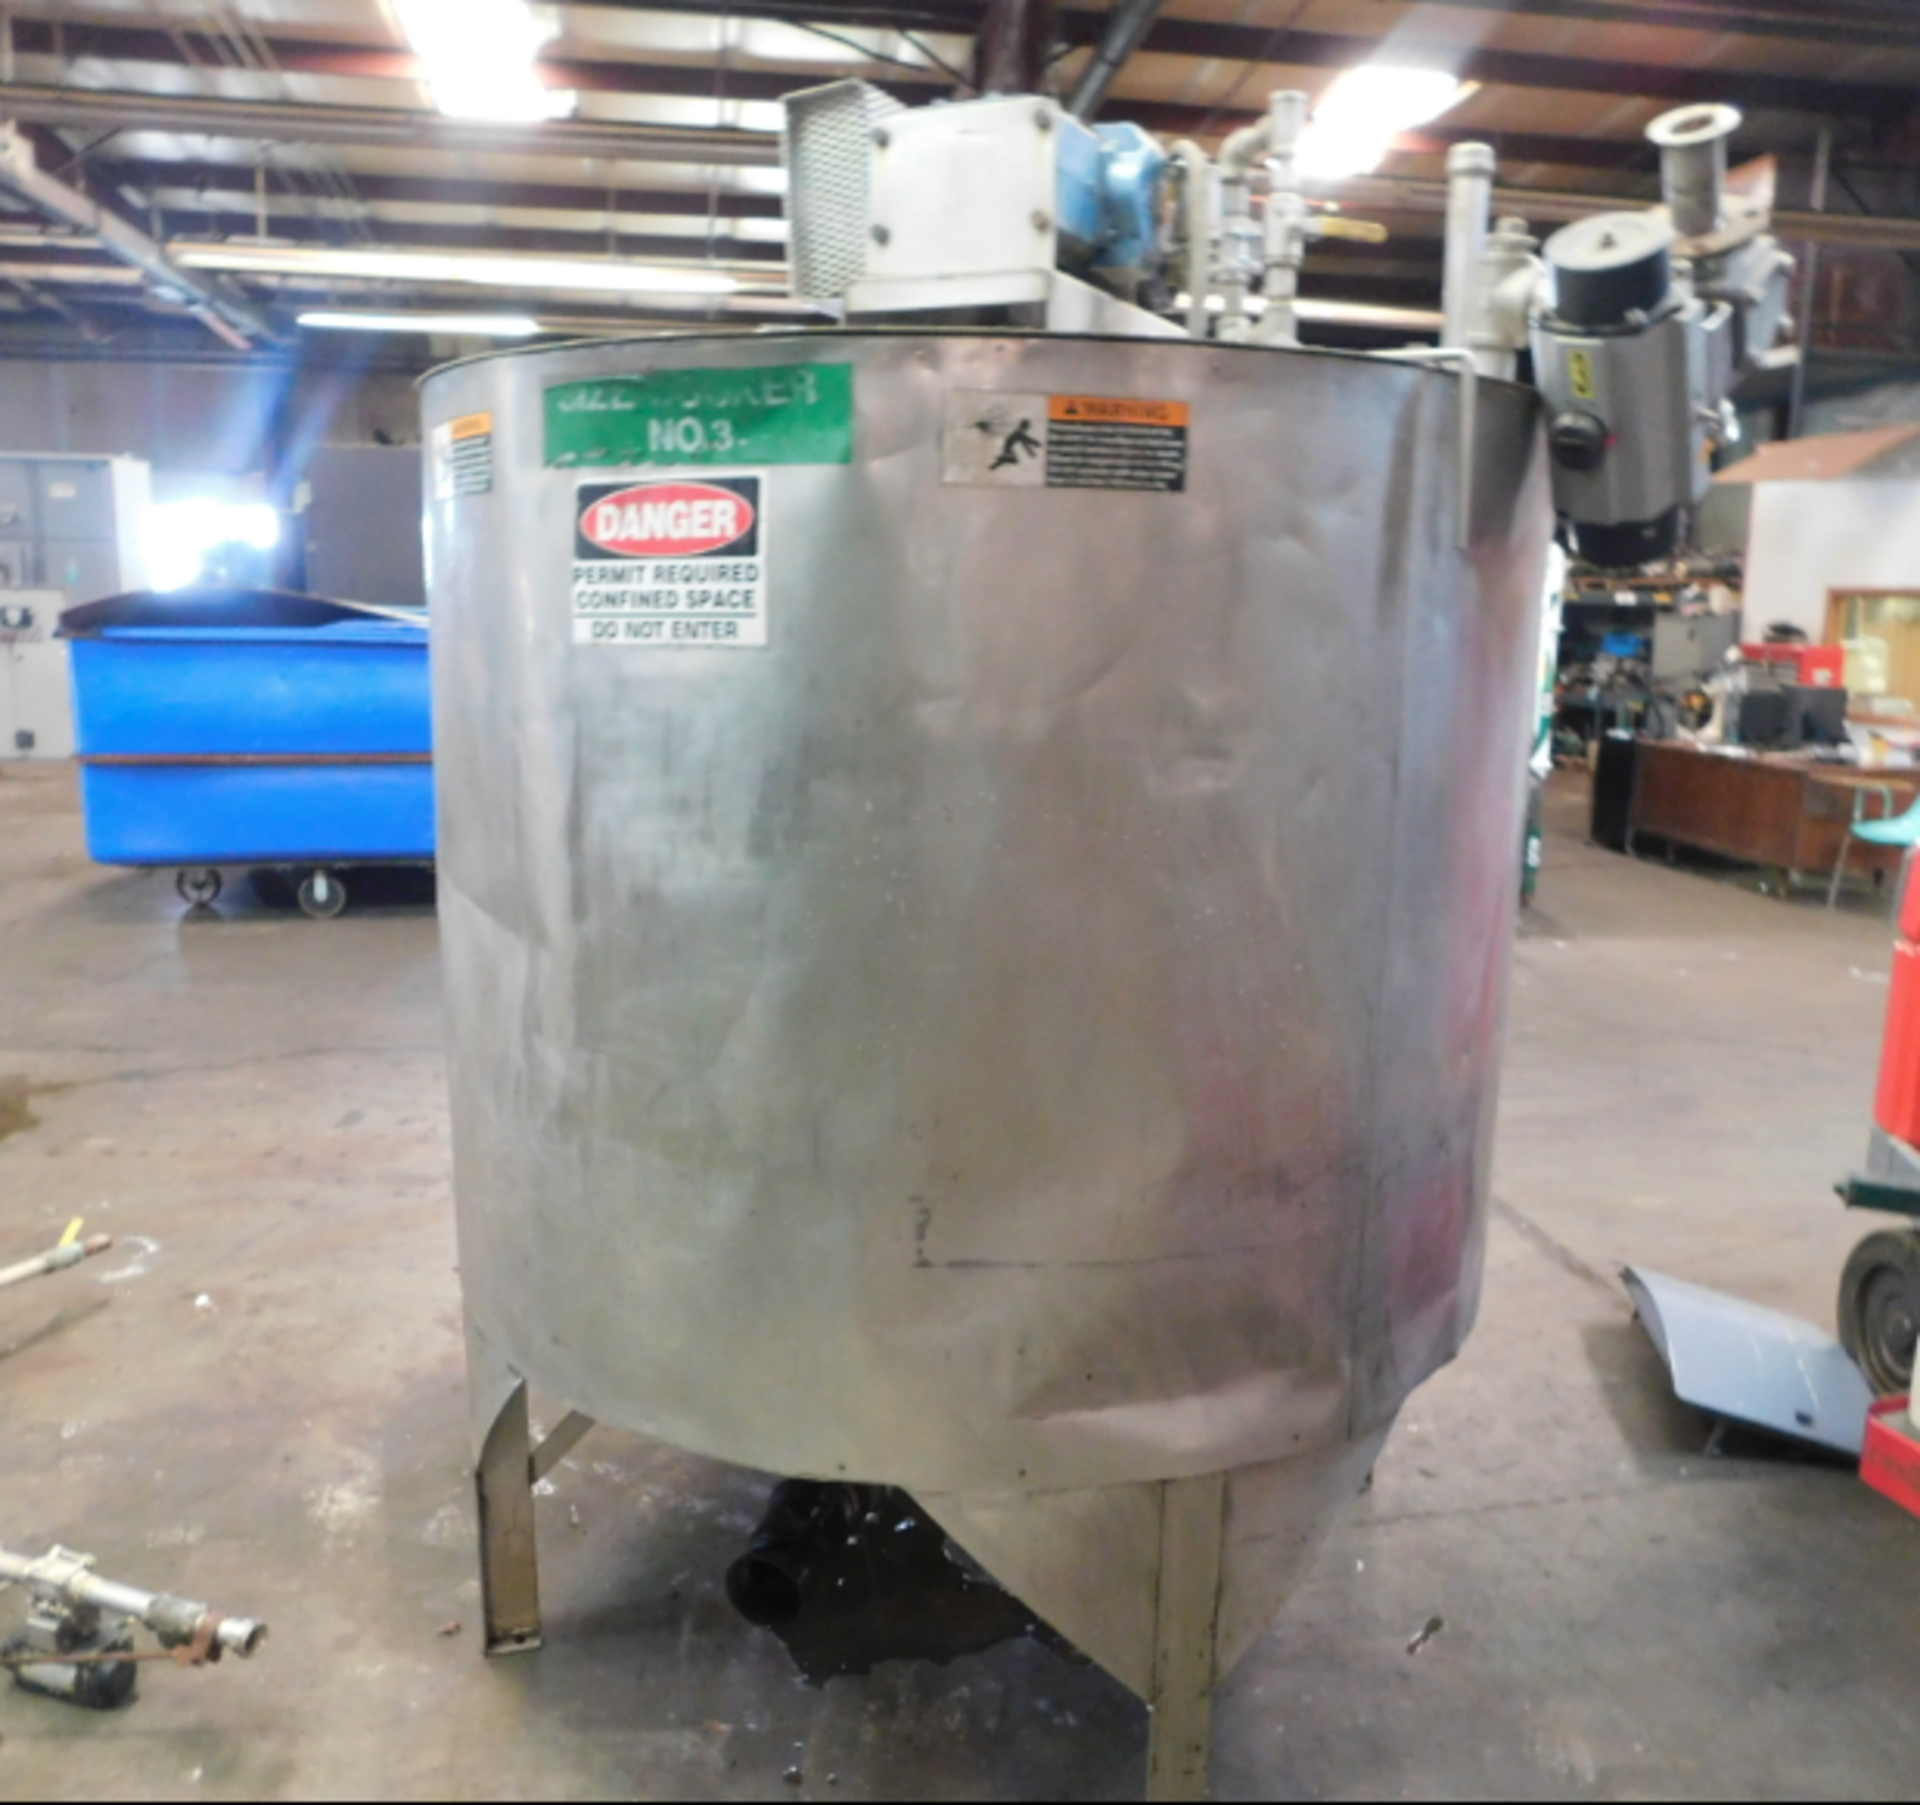 Stainless Steel Tank, 62 inches Diameter, 48.25 inches Height, Agitator/Mixer, Discharge Side and - Image 2 of 3